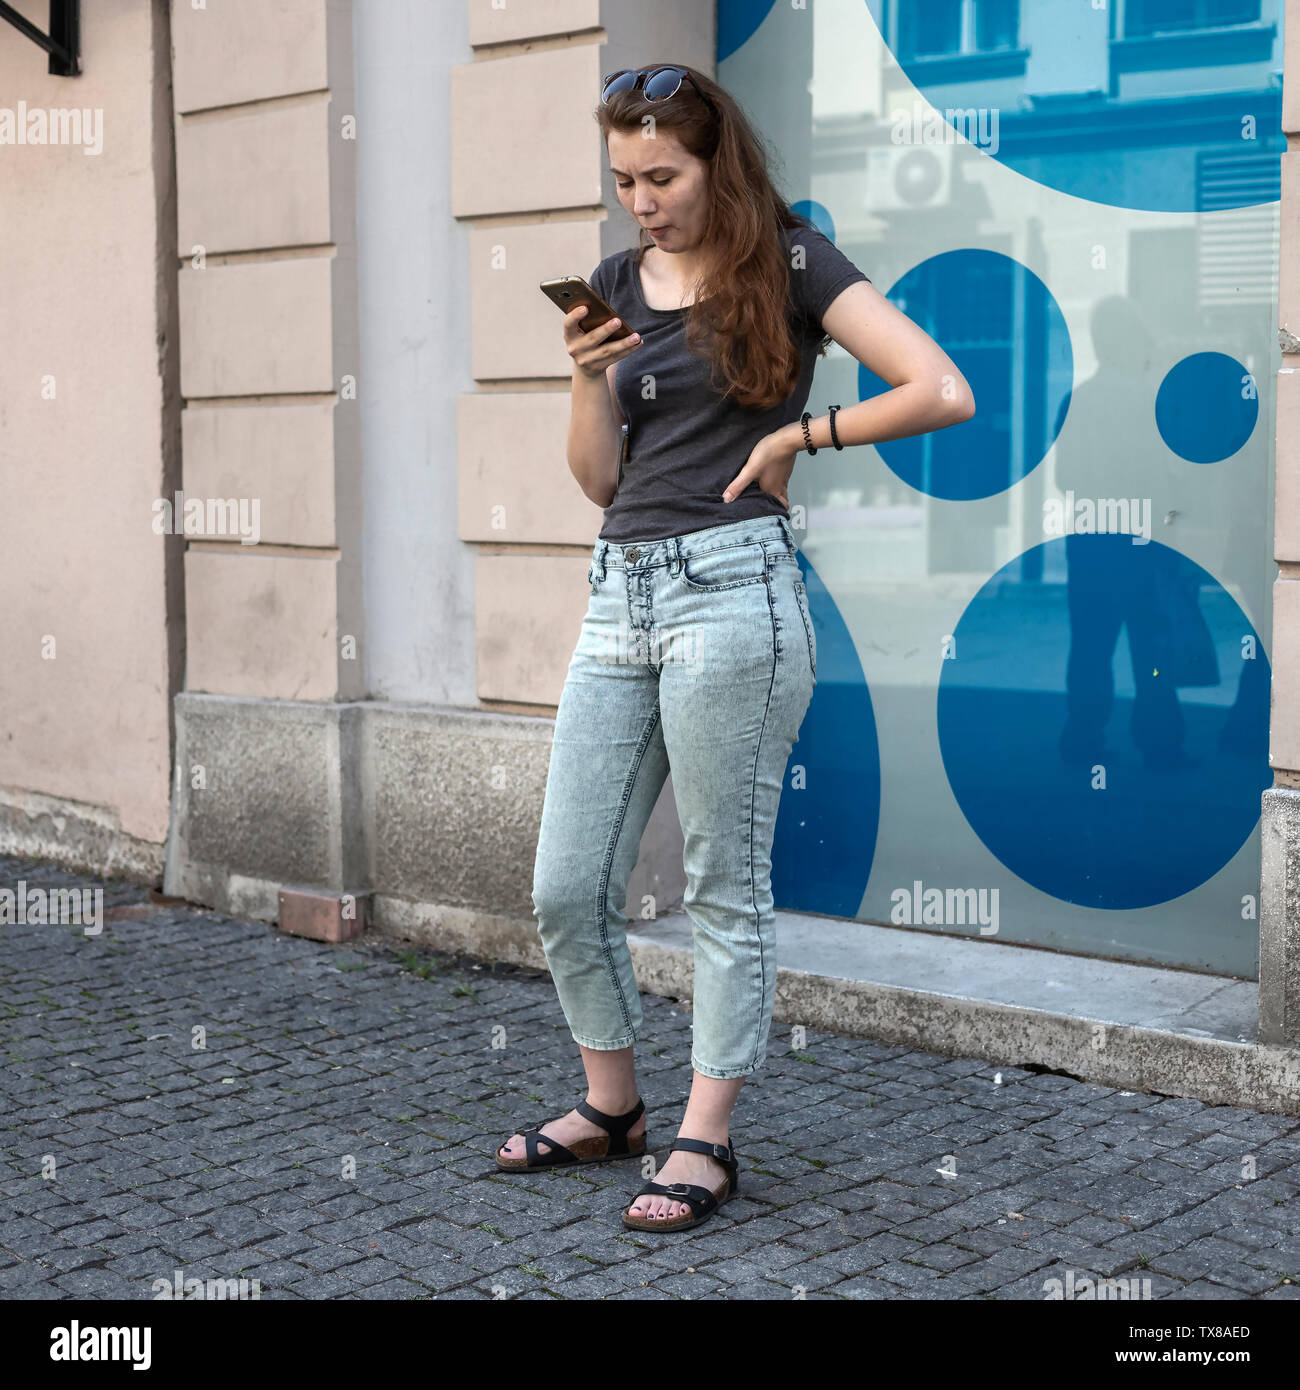 Belgrade, Serbia, June 22nd 2019: Urban scene with young woman standing on the street and handling her mobile phone Stock Photo